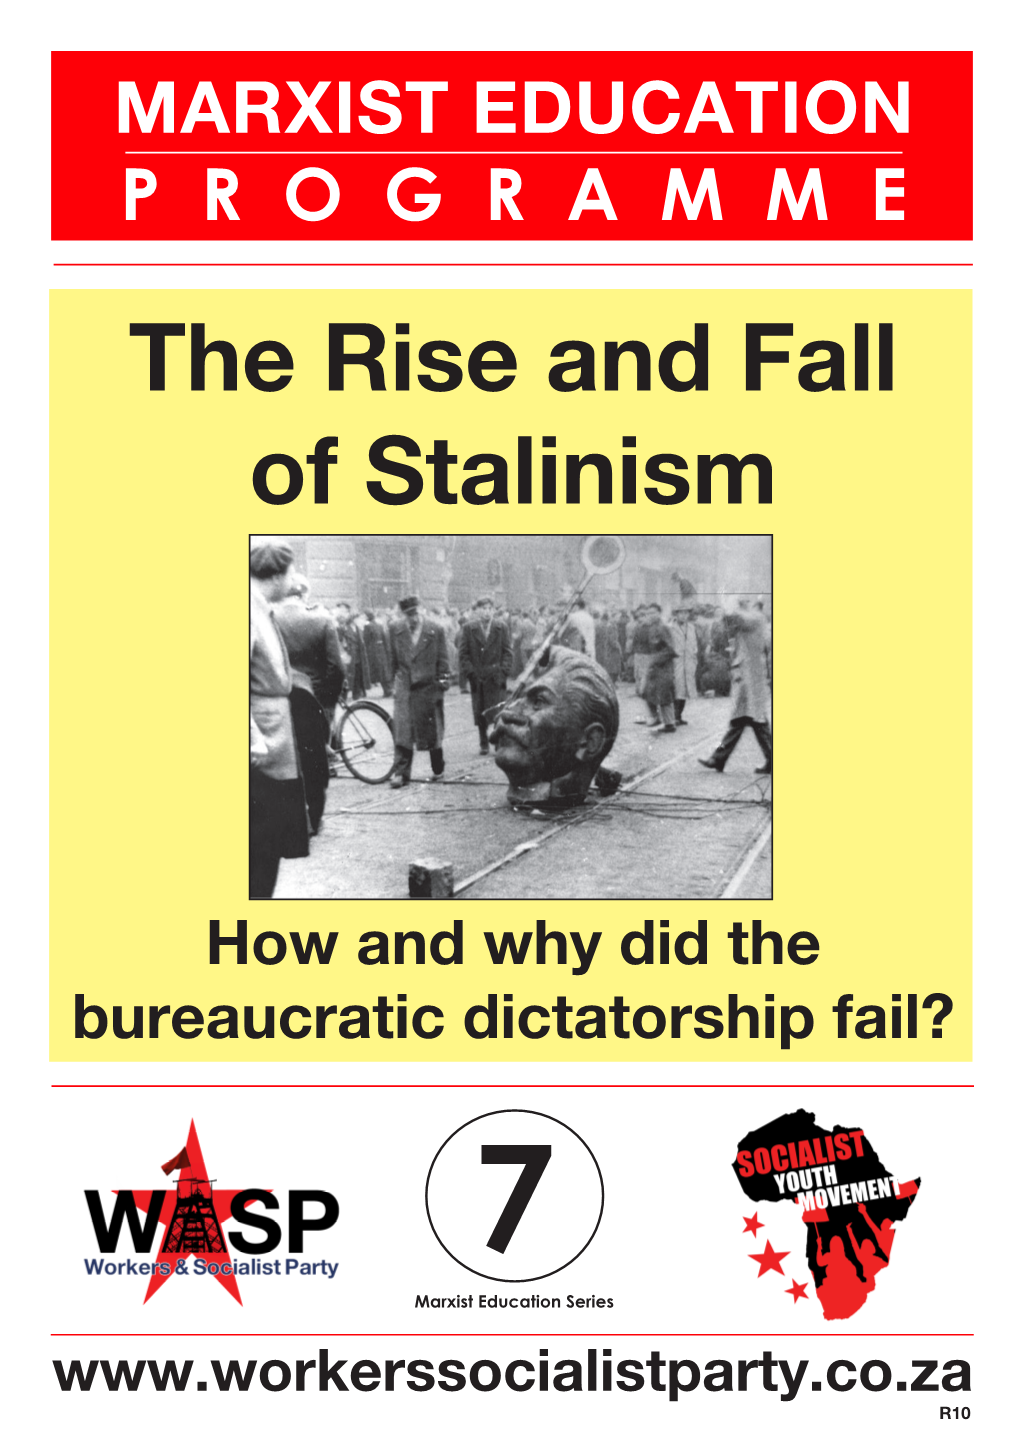 The Rise and Fall of Stalinism